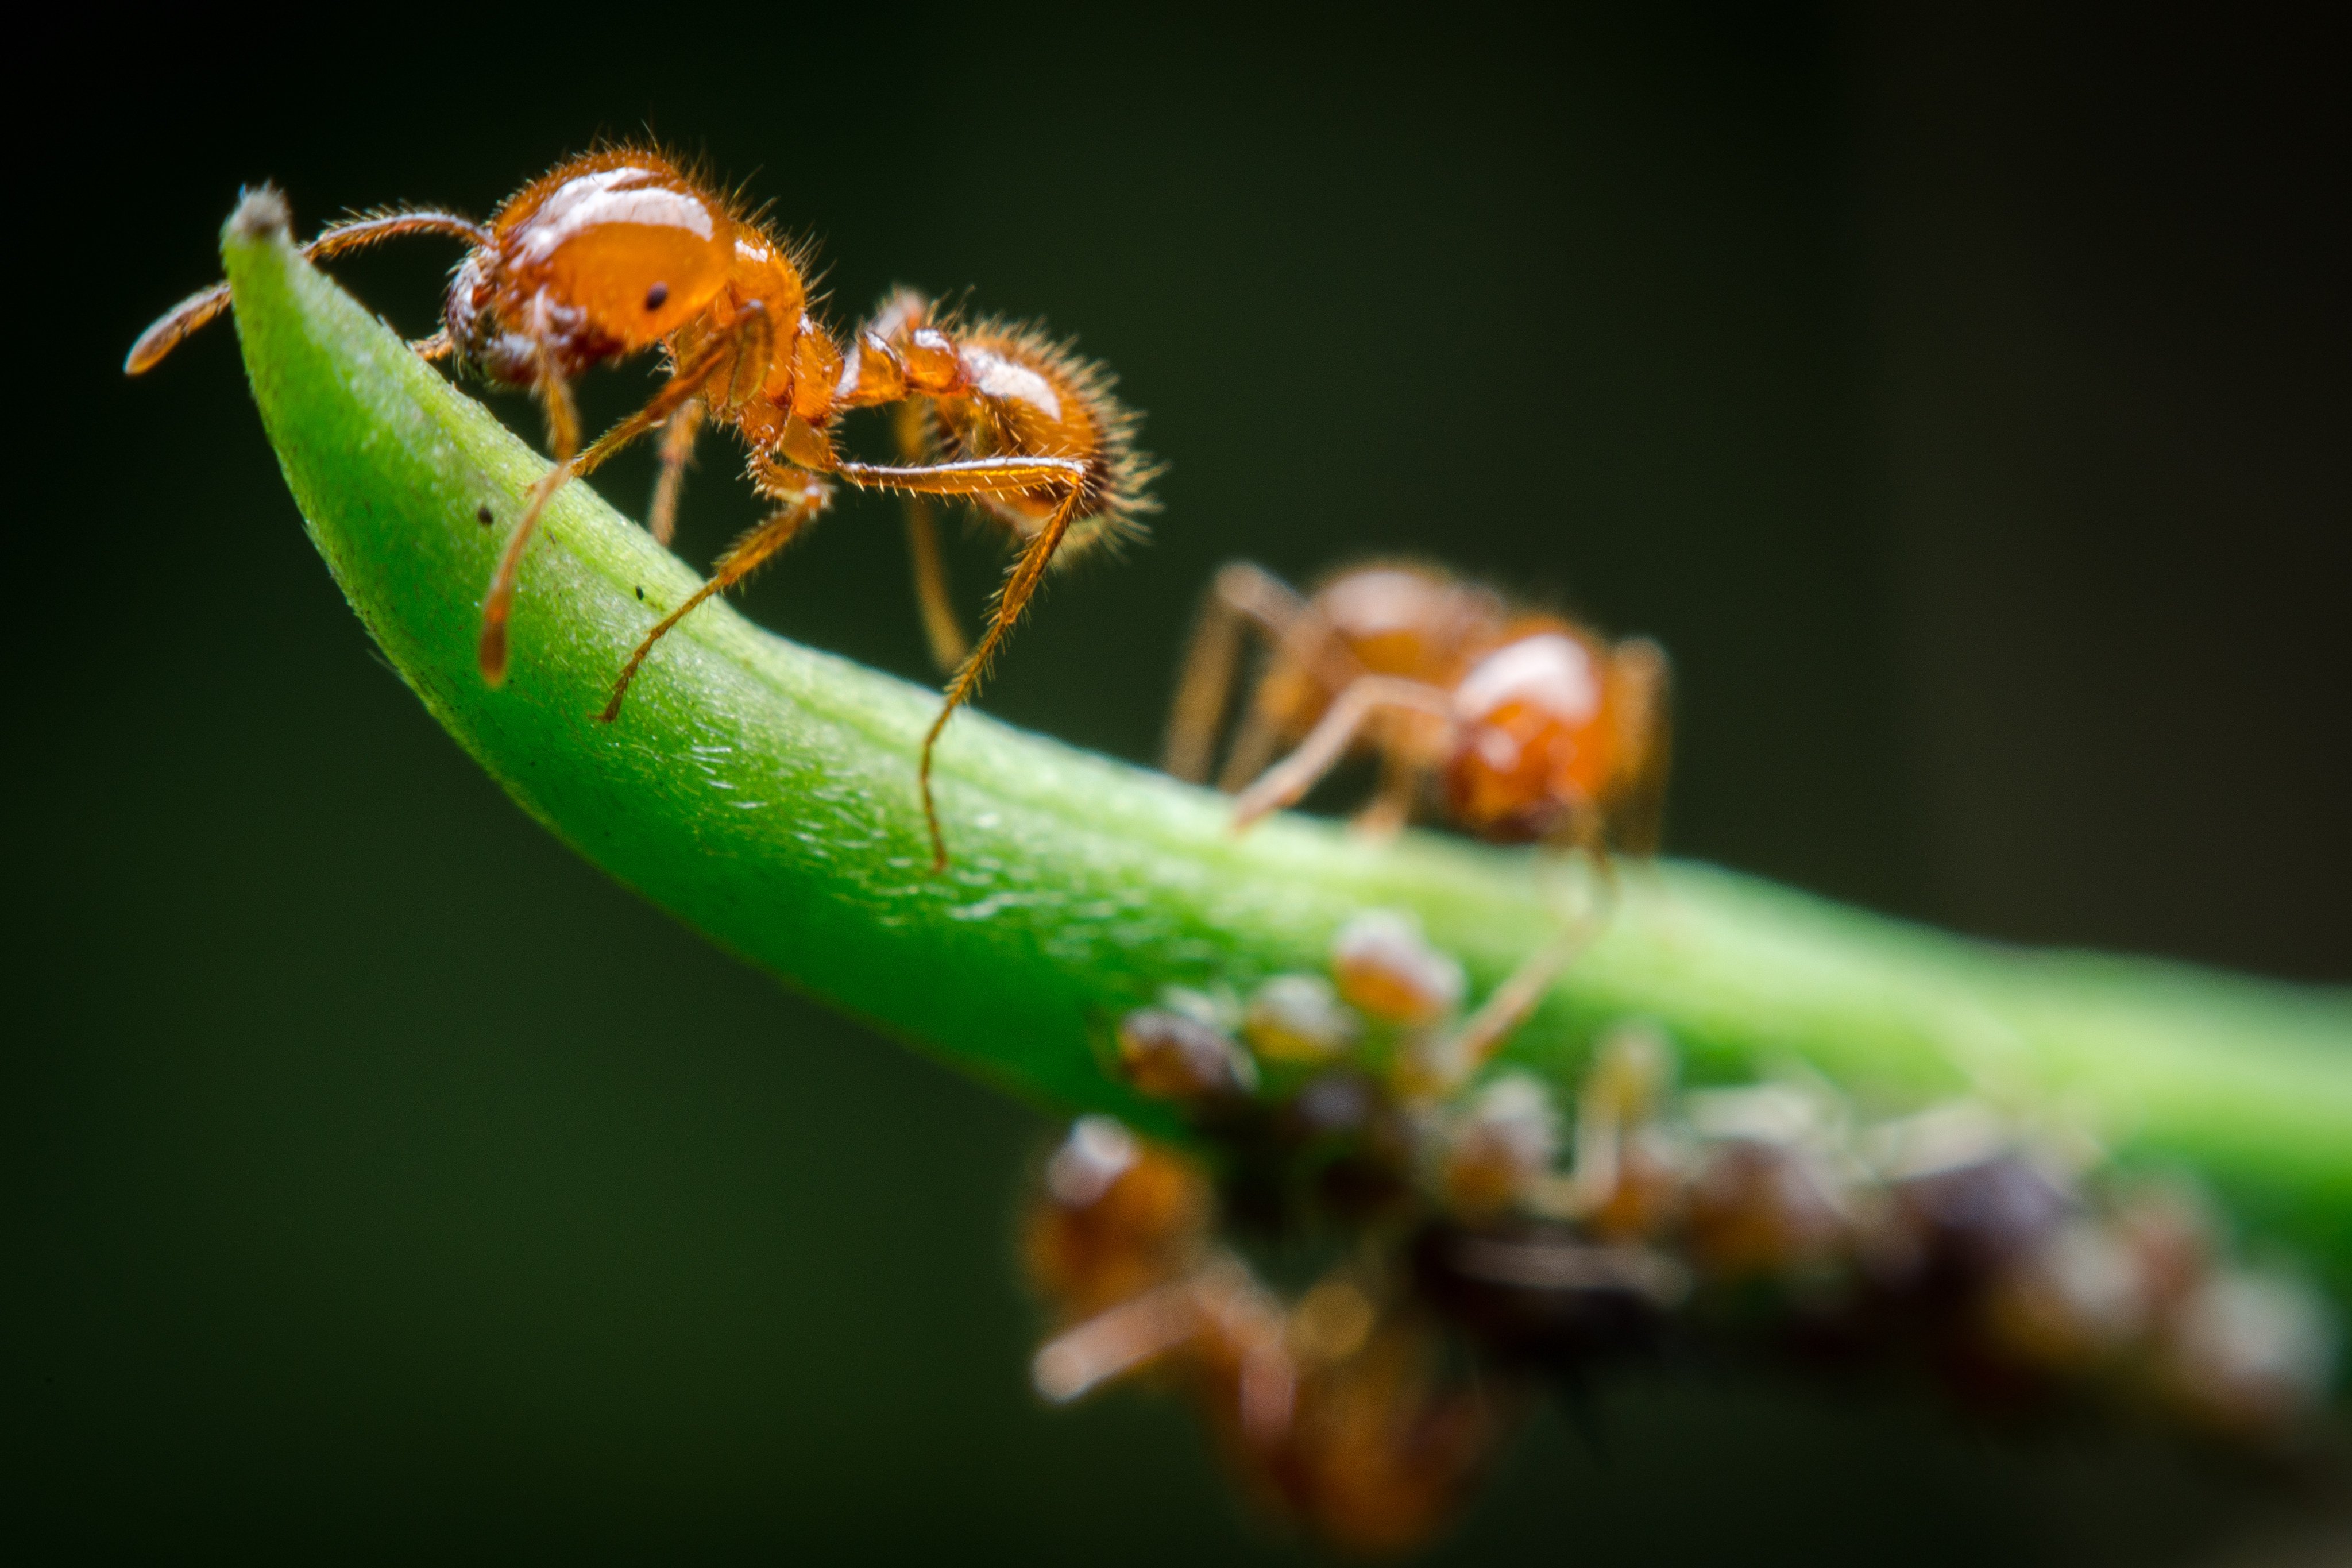 Red fire ants. The first fire ants discovered in Japan were at ports in Osaka, Nagoya and Kobe in 2017. Photo: Shutterstock